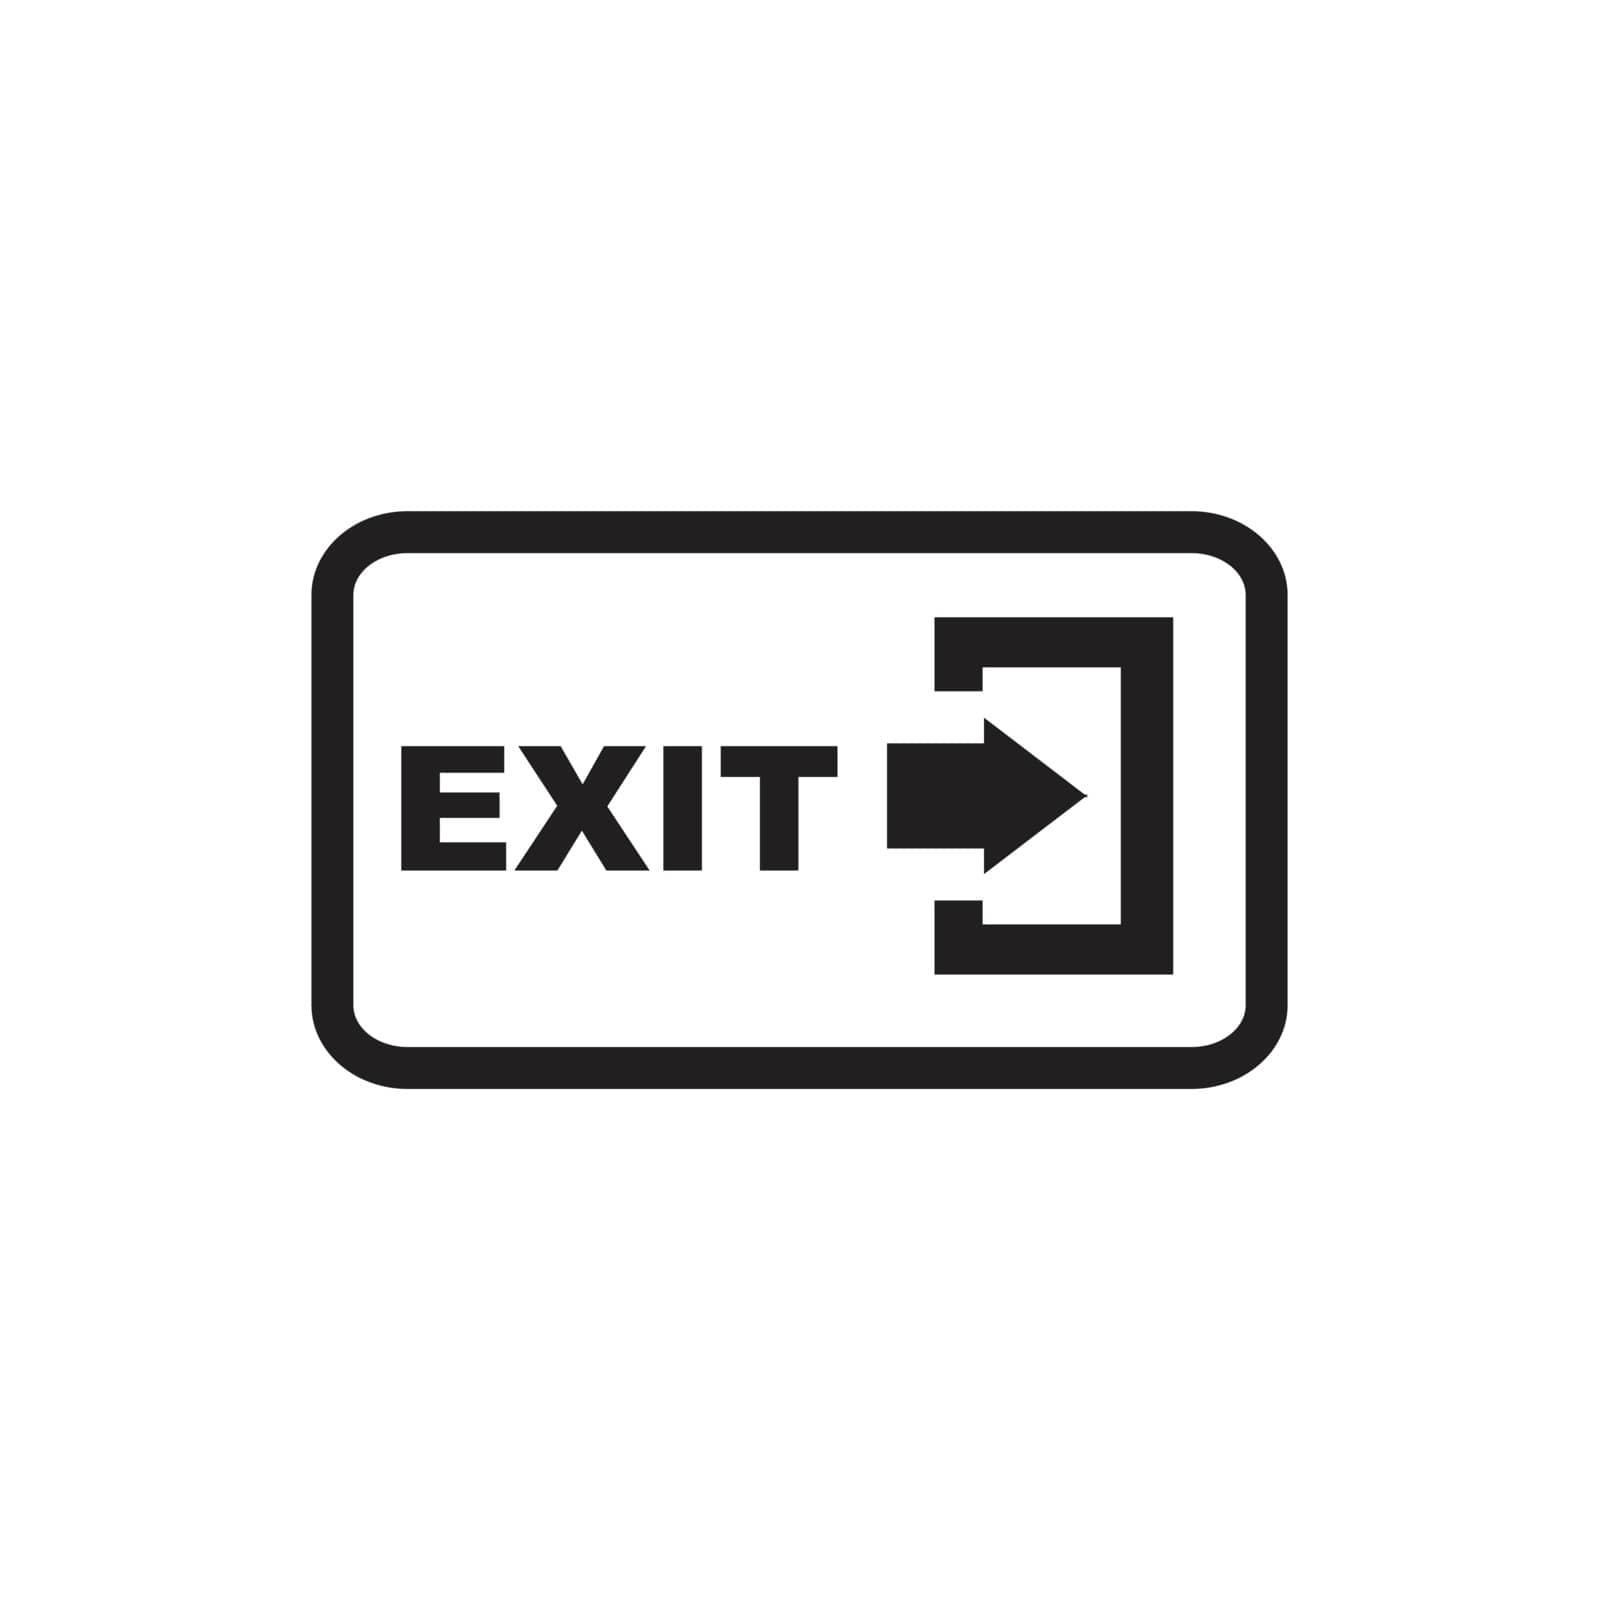 Arrow Logout Exit icon by iconmama